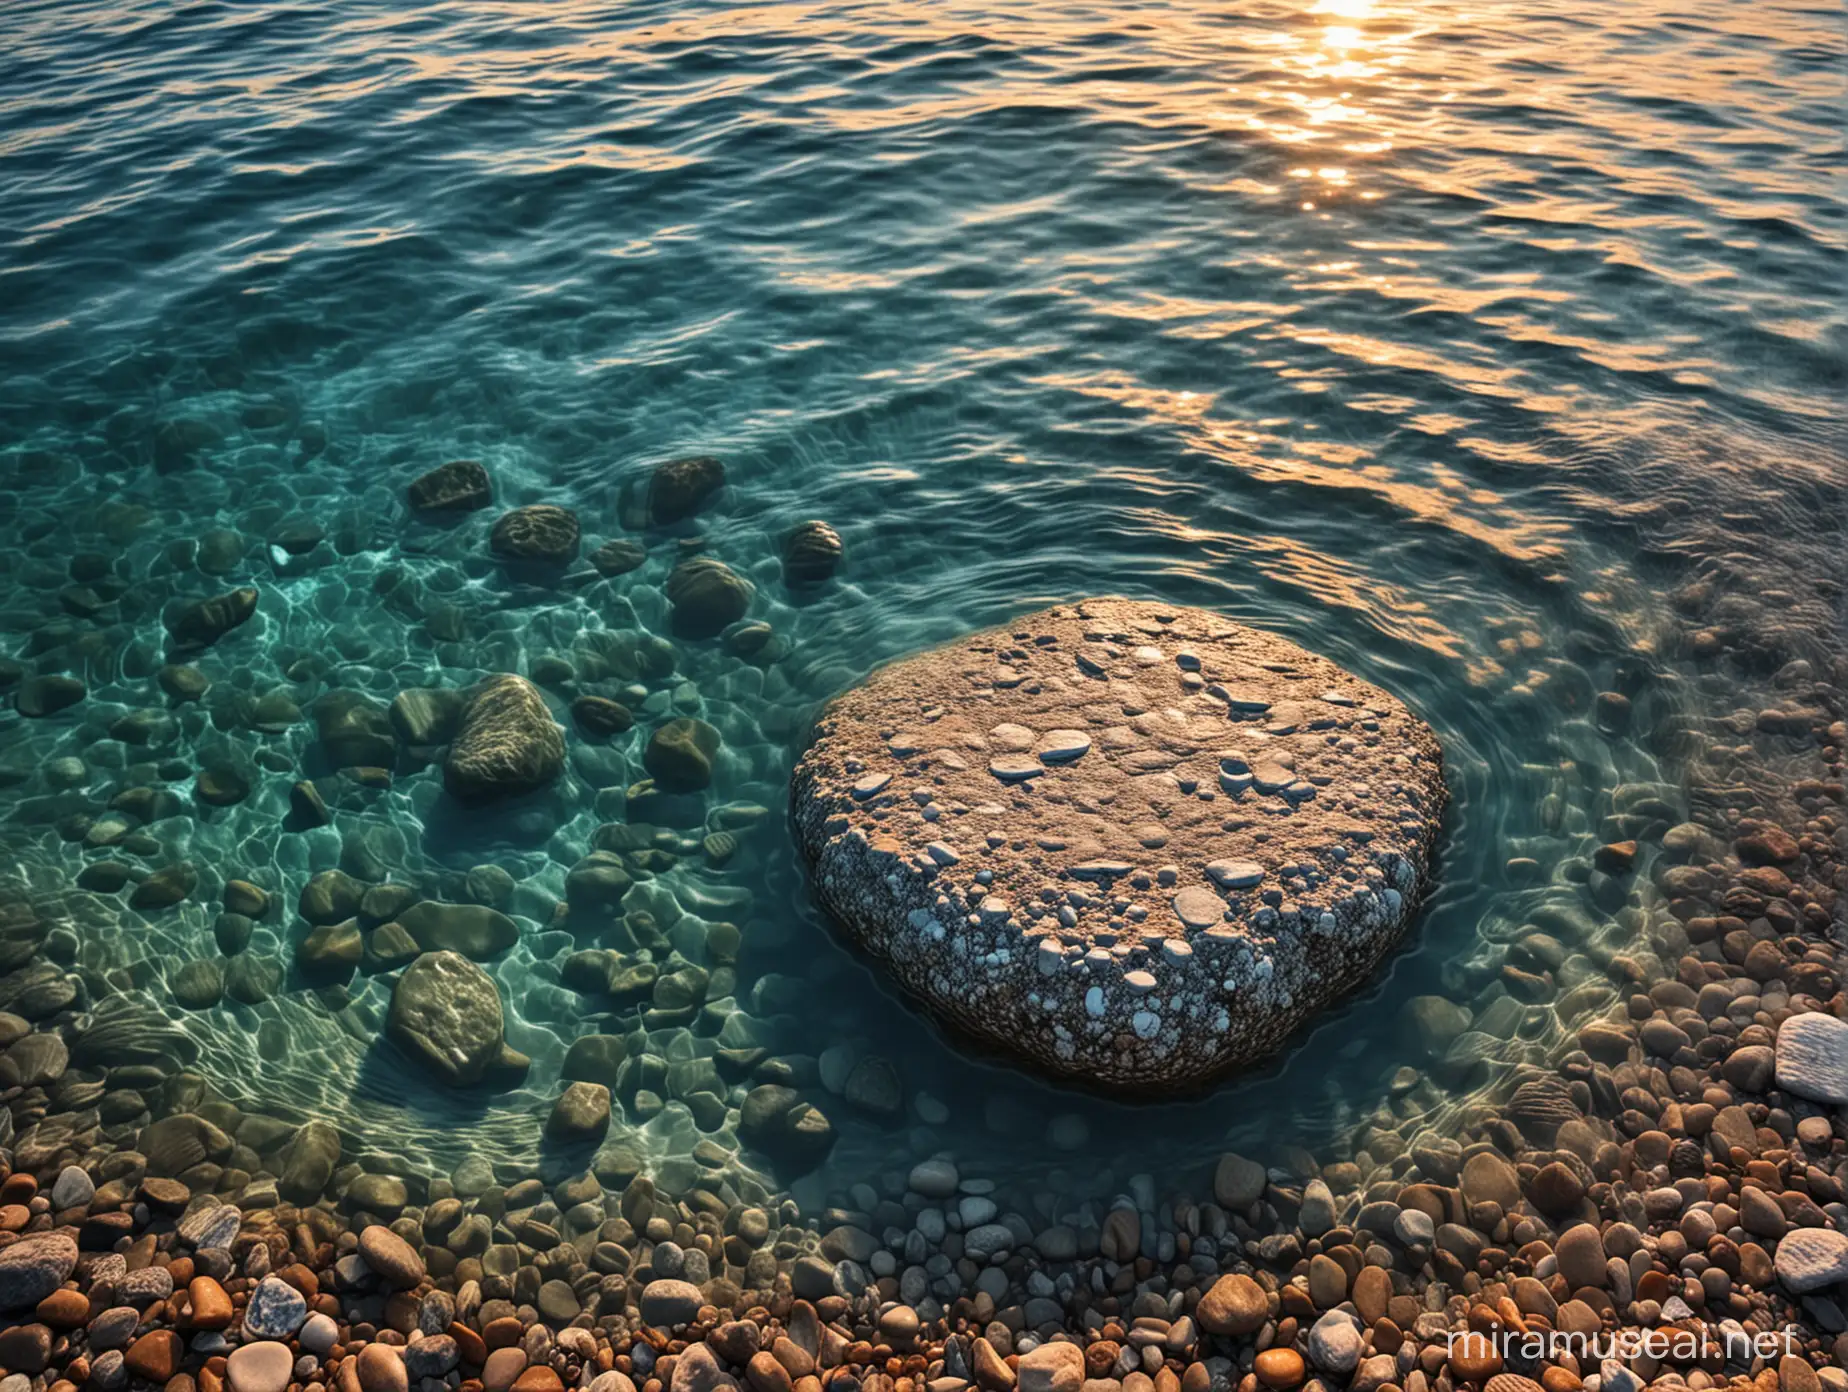 seashore stone in blue water clear water
at sunset